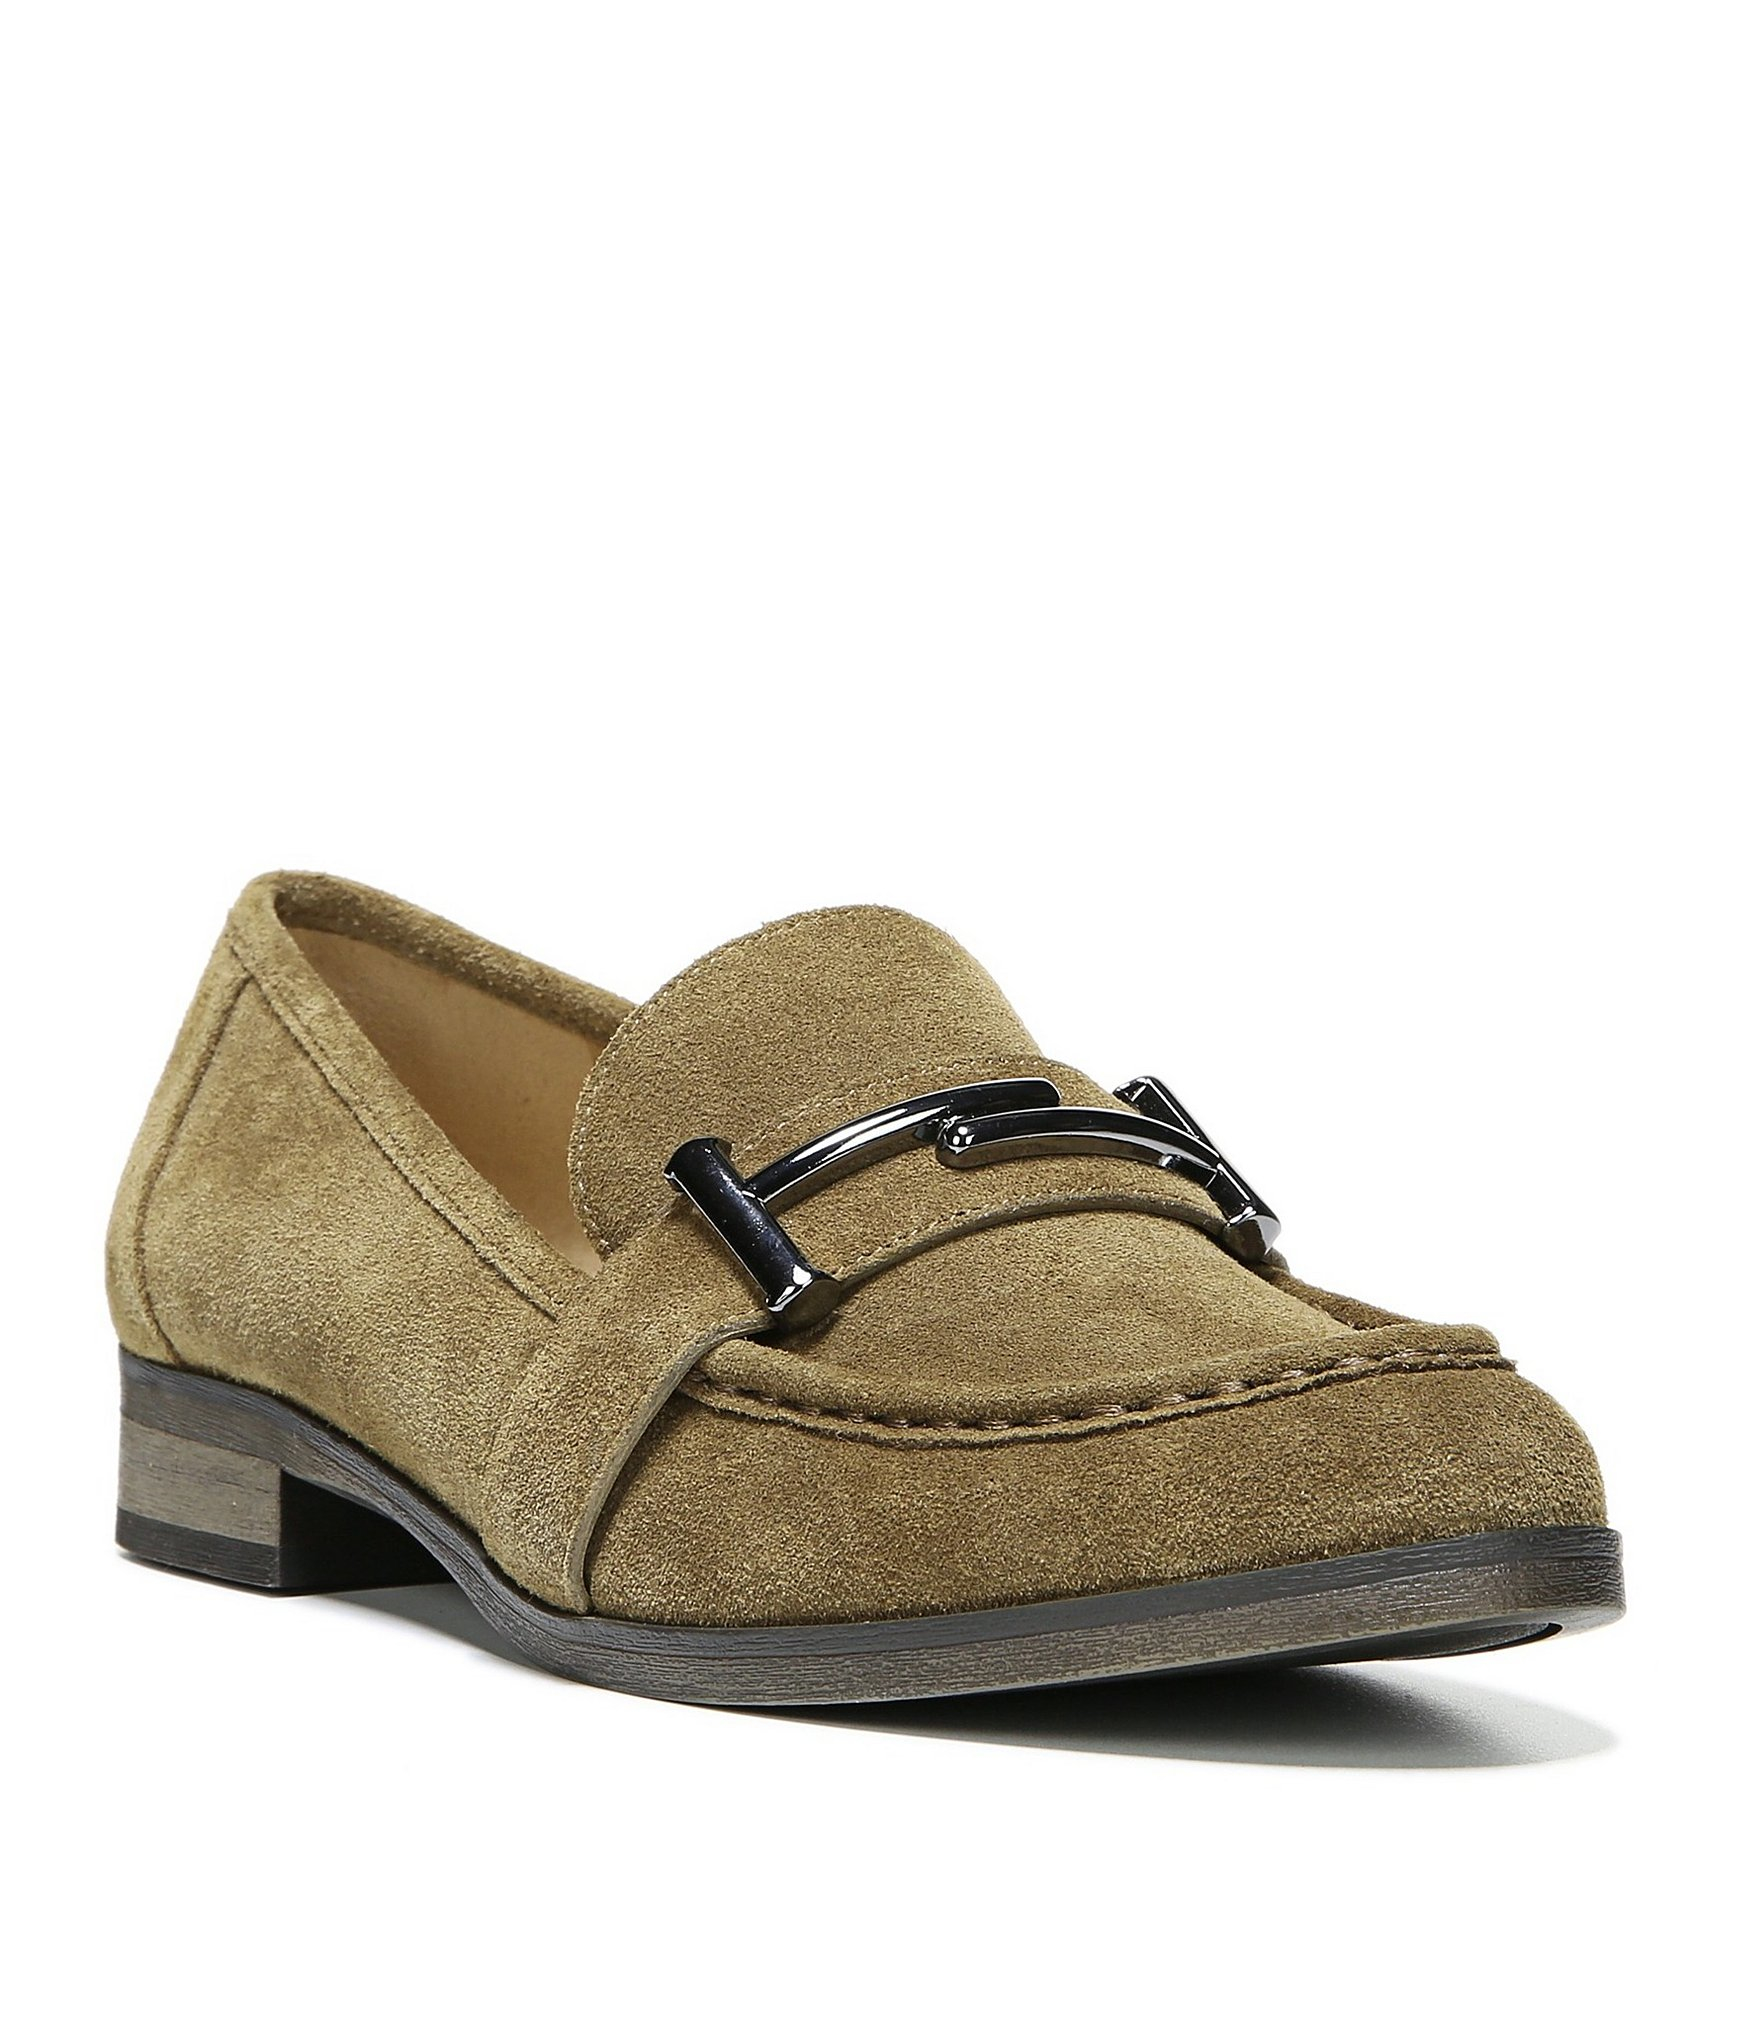 Lyst - Franco Sarto Suede Baylor Loafers in Natural